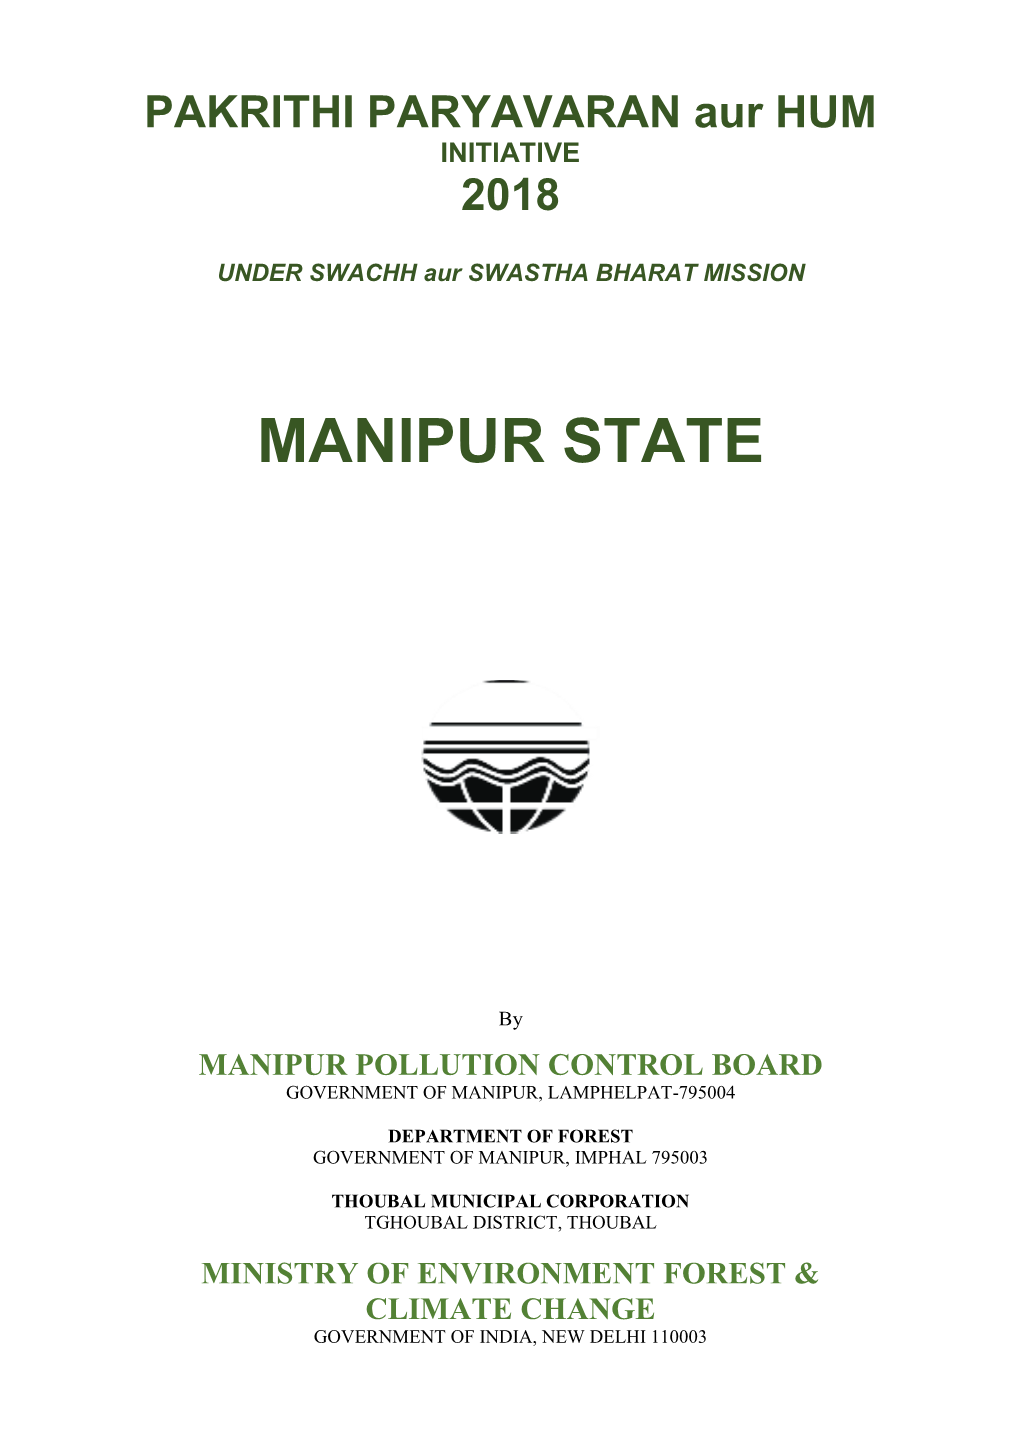 Manipur Pollution Control Board Government of Manipur, Lamphelpat-795004